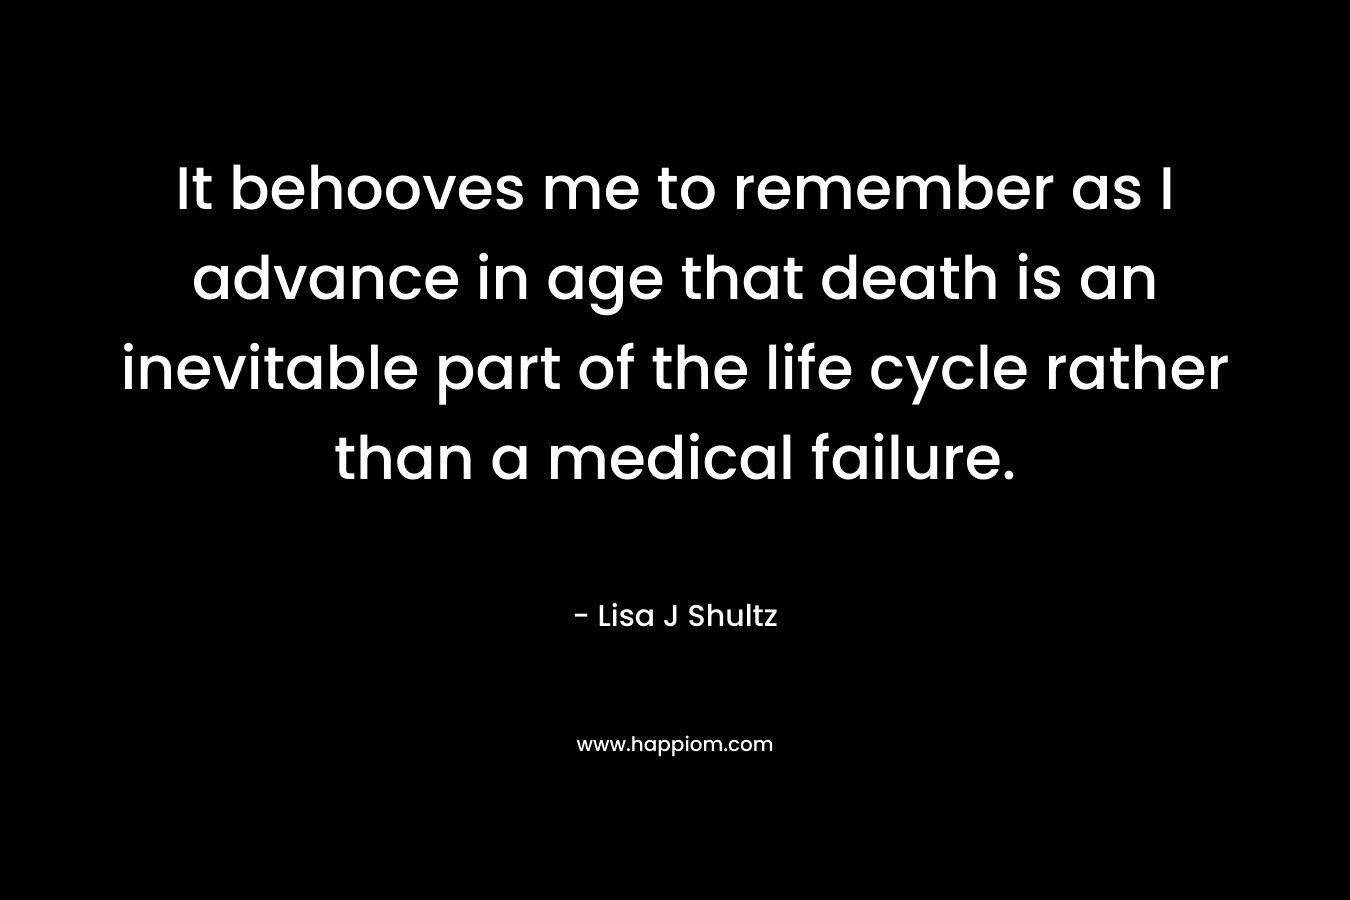 It behooves me to remember as I advance in age that death is an inevitable part of the life cycle rather than a medical failure. – Lisa J Shultz